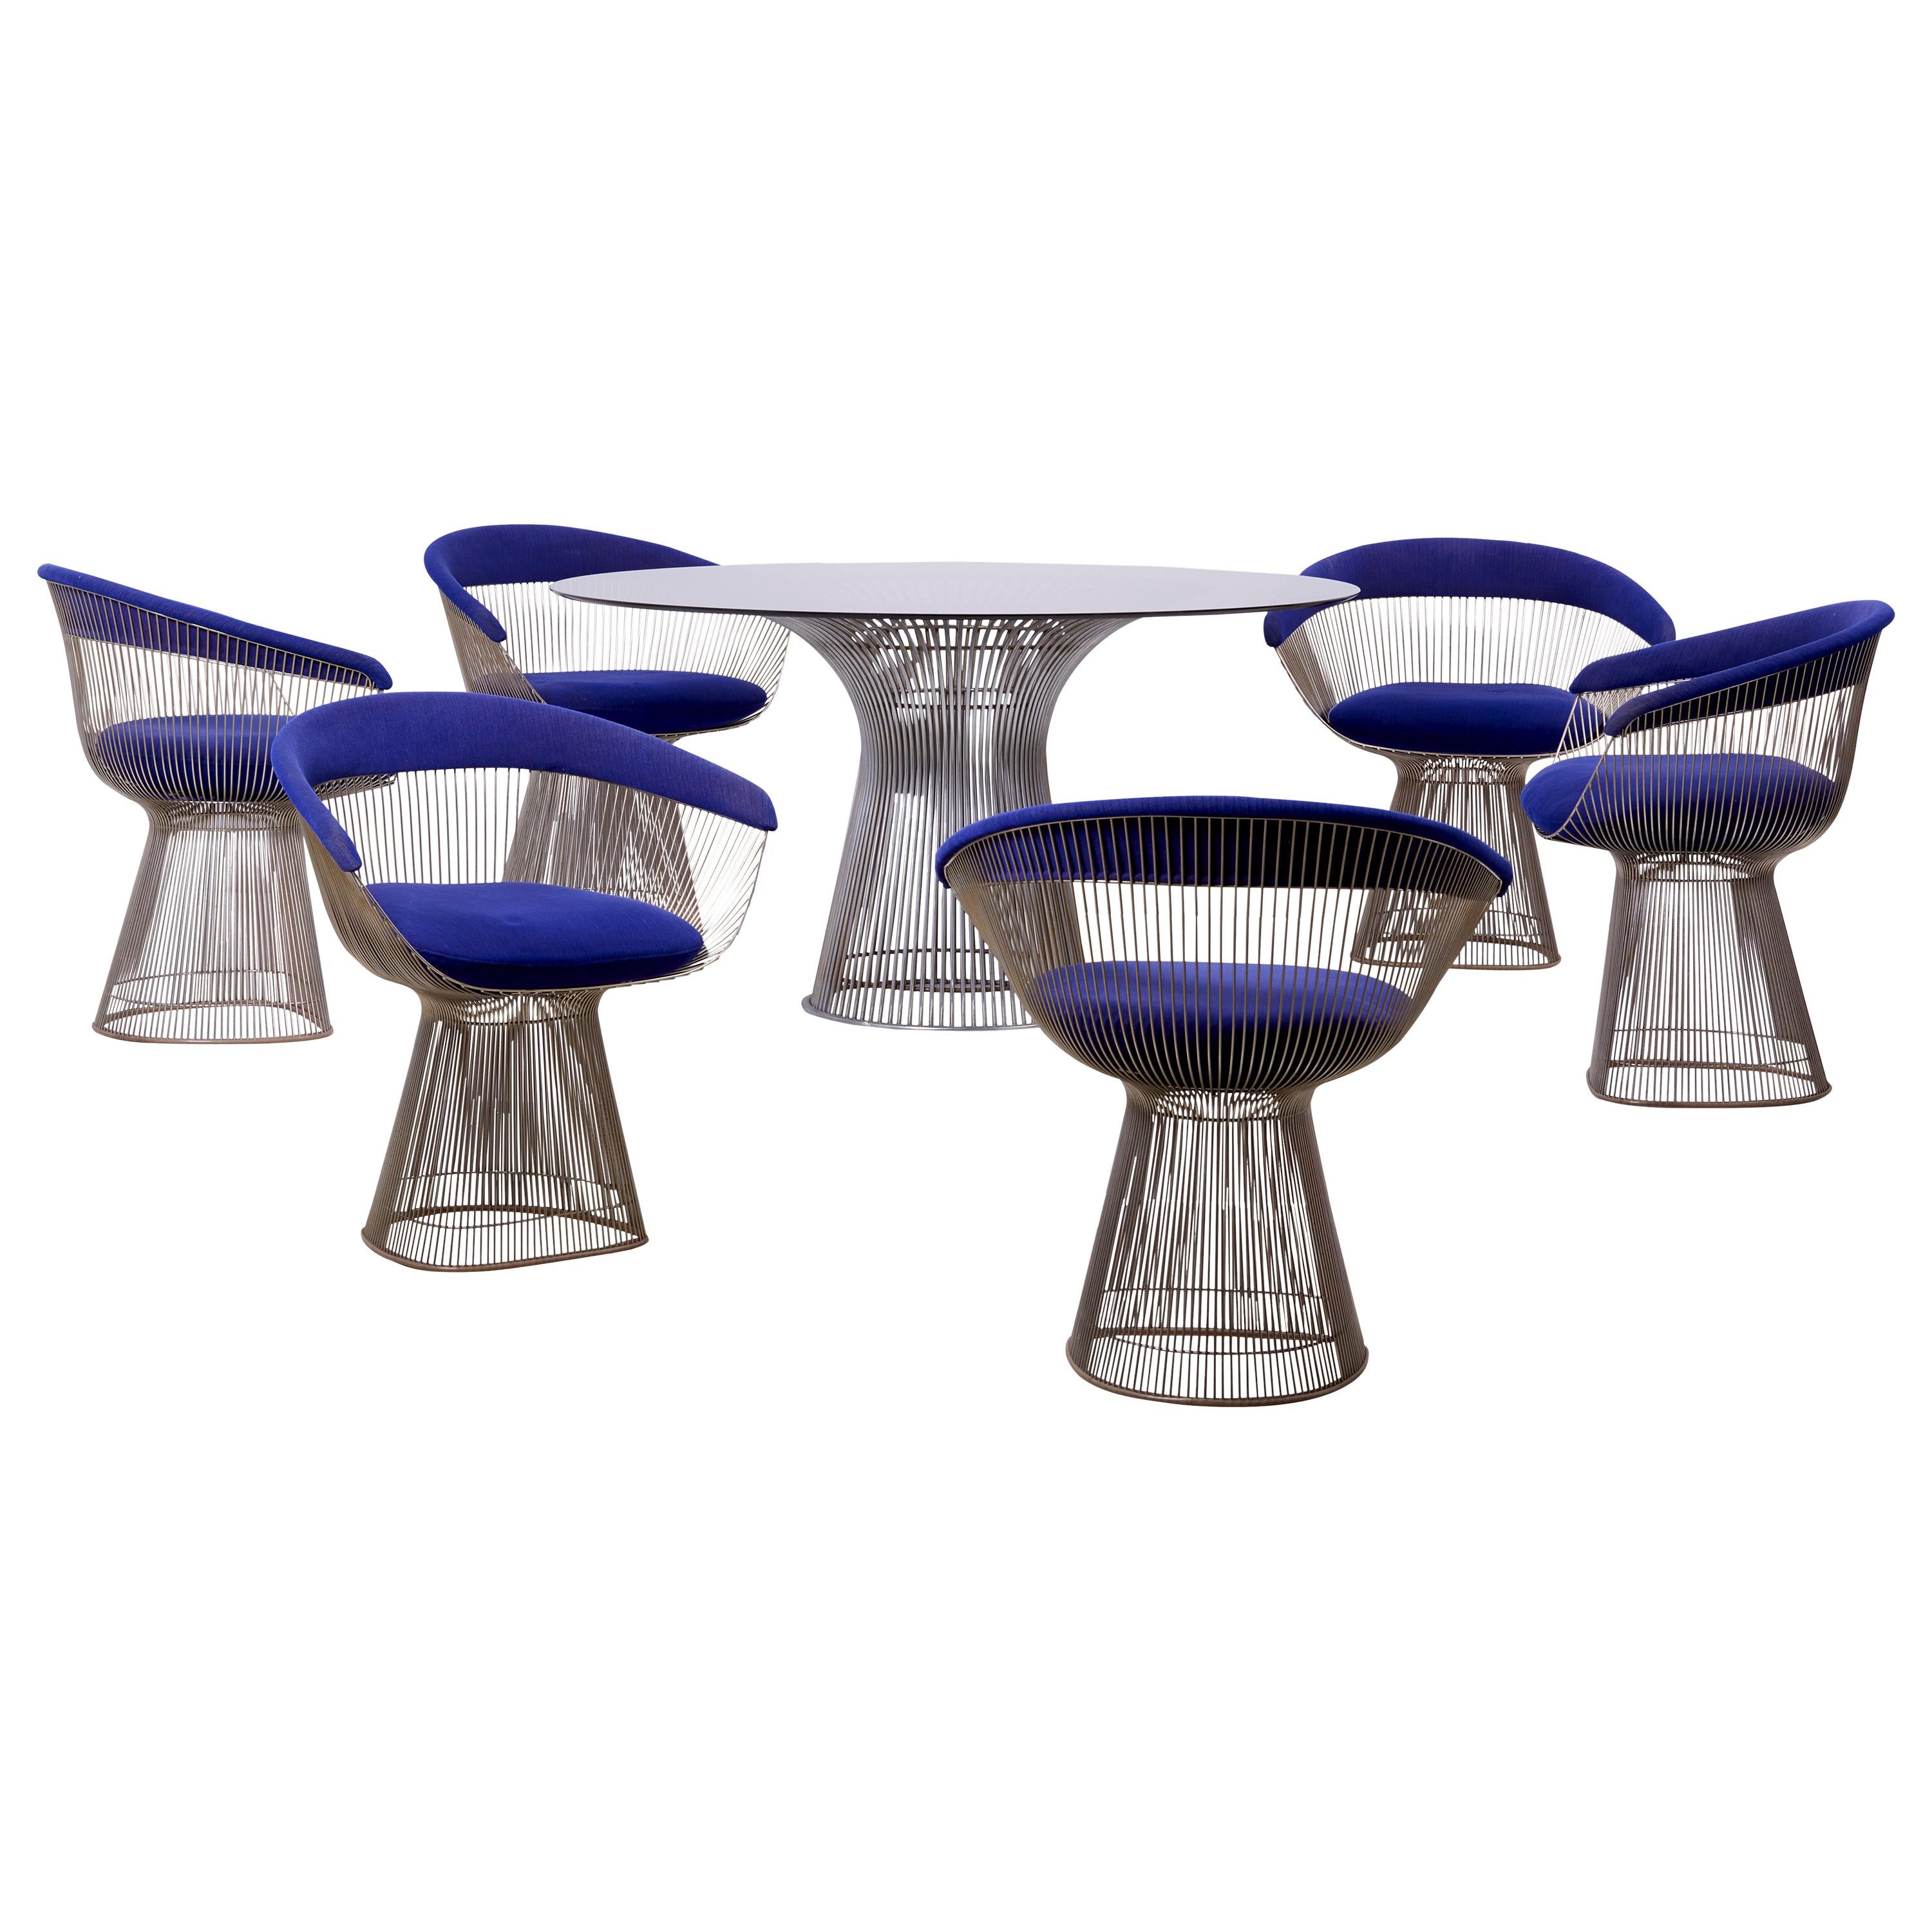 Set of Wire Dining Table and Six Chairs by Warren Platner for Knoll, US - 1960s